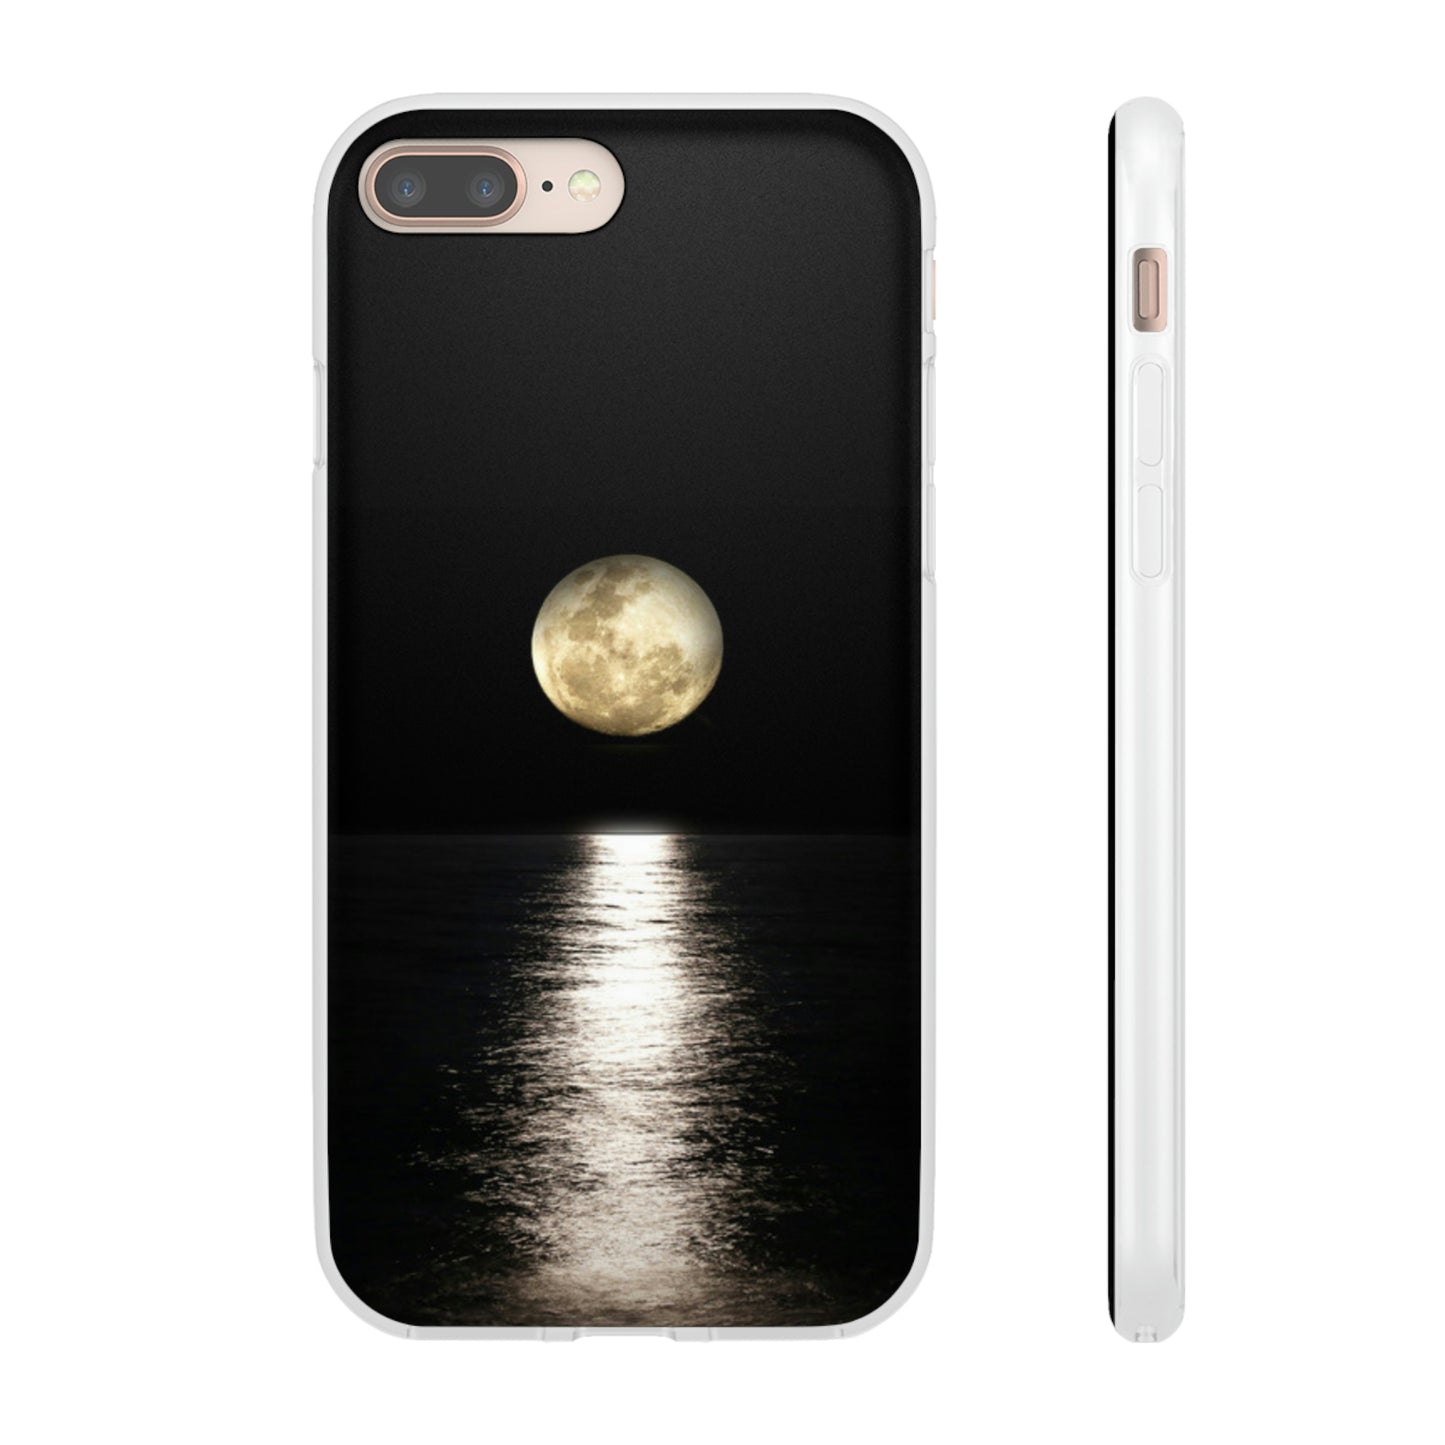 Moon reflects on water Flexi Cases Samsung Apple funny case protection slim design gift custom personalized protect iphone galazy S